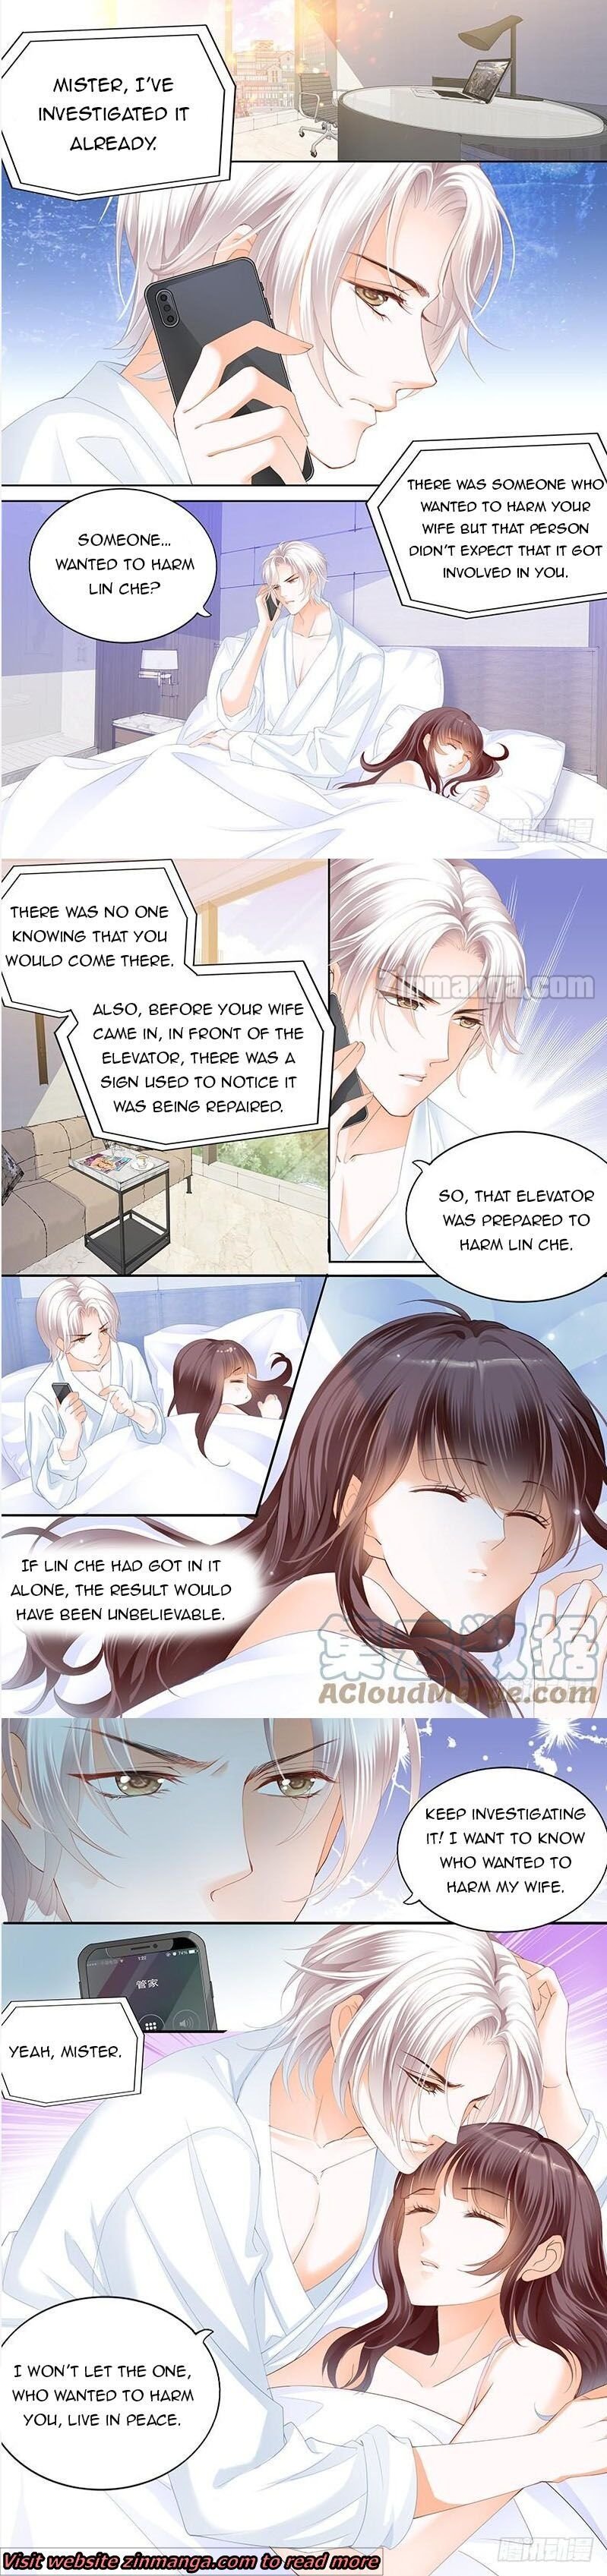 The Beautiful Wife of the Whirlwind Marriage Chapter 138 - Page 3